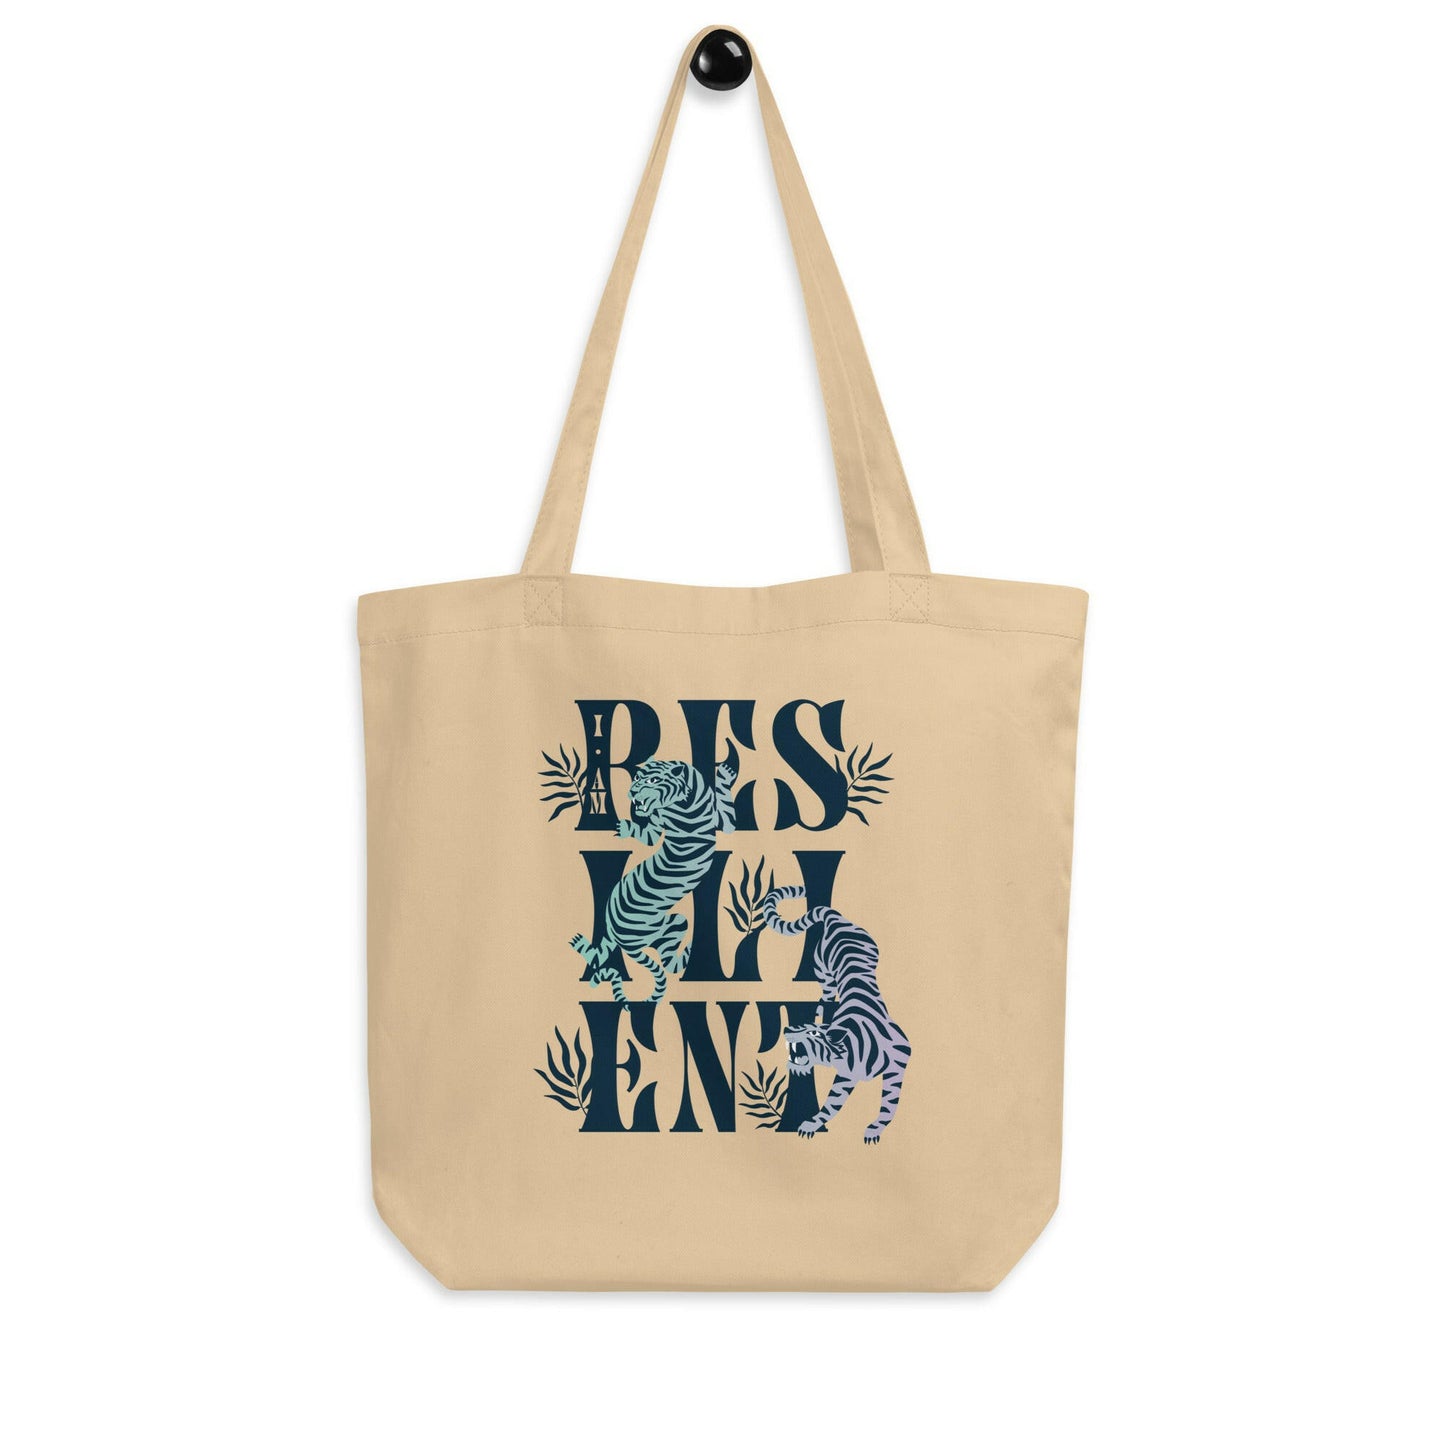 I Am Resilient | Eco Tote Bag.